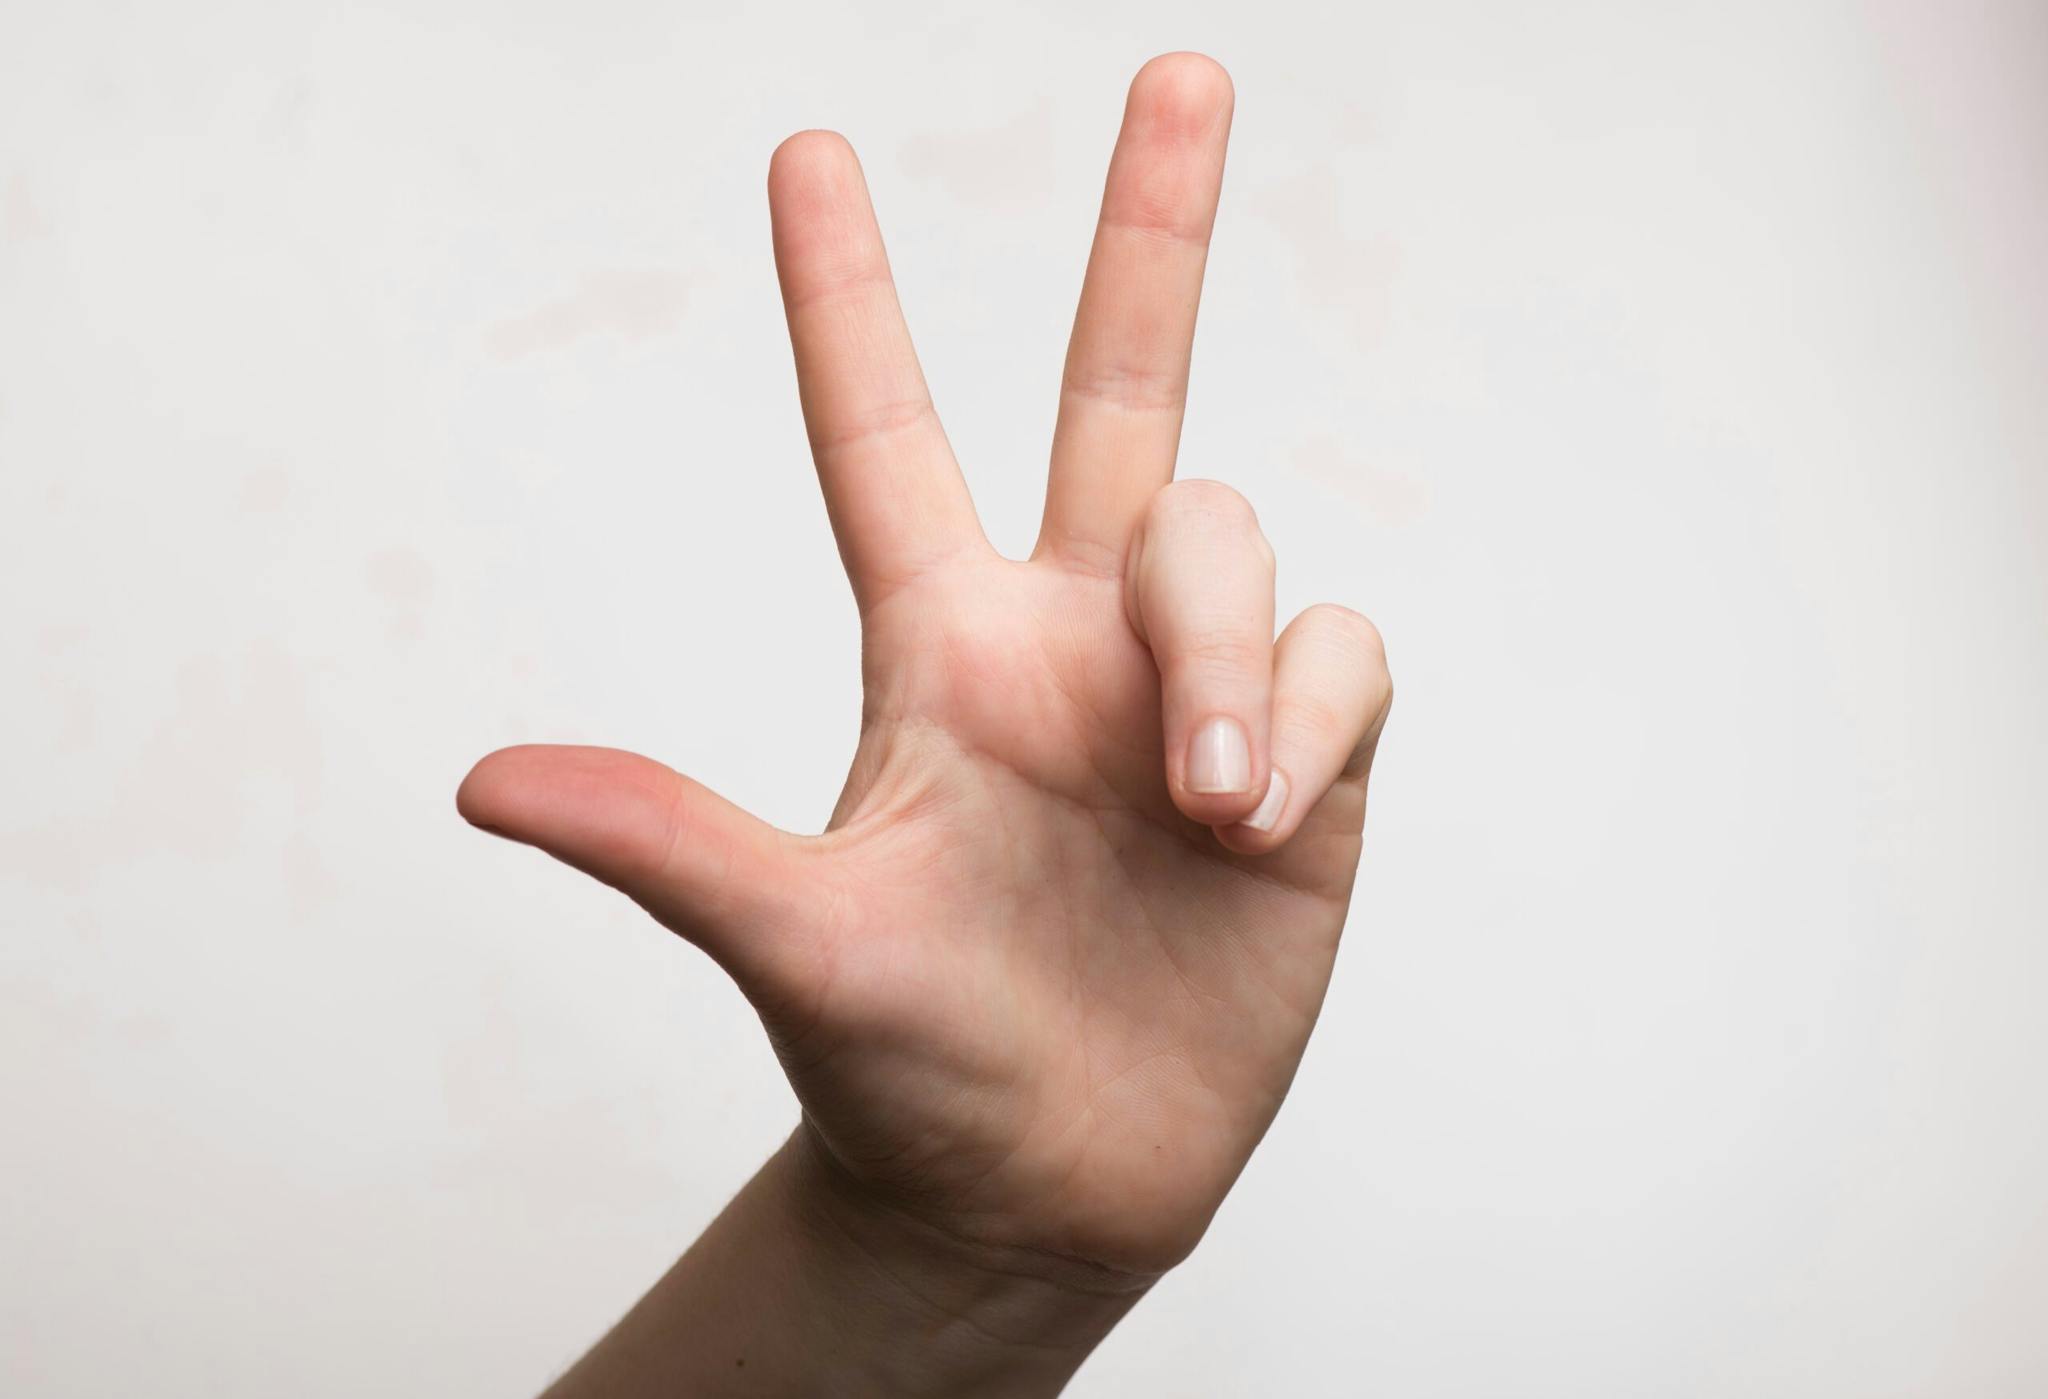 A person displaying the peace sign with their hand, symbolizing harmony and tranquility.